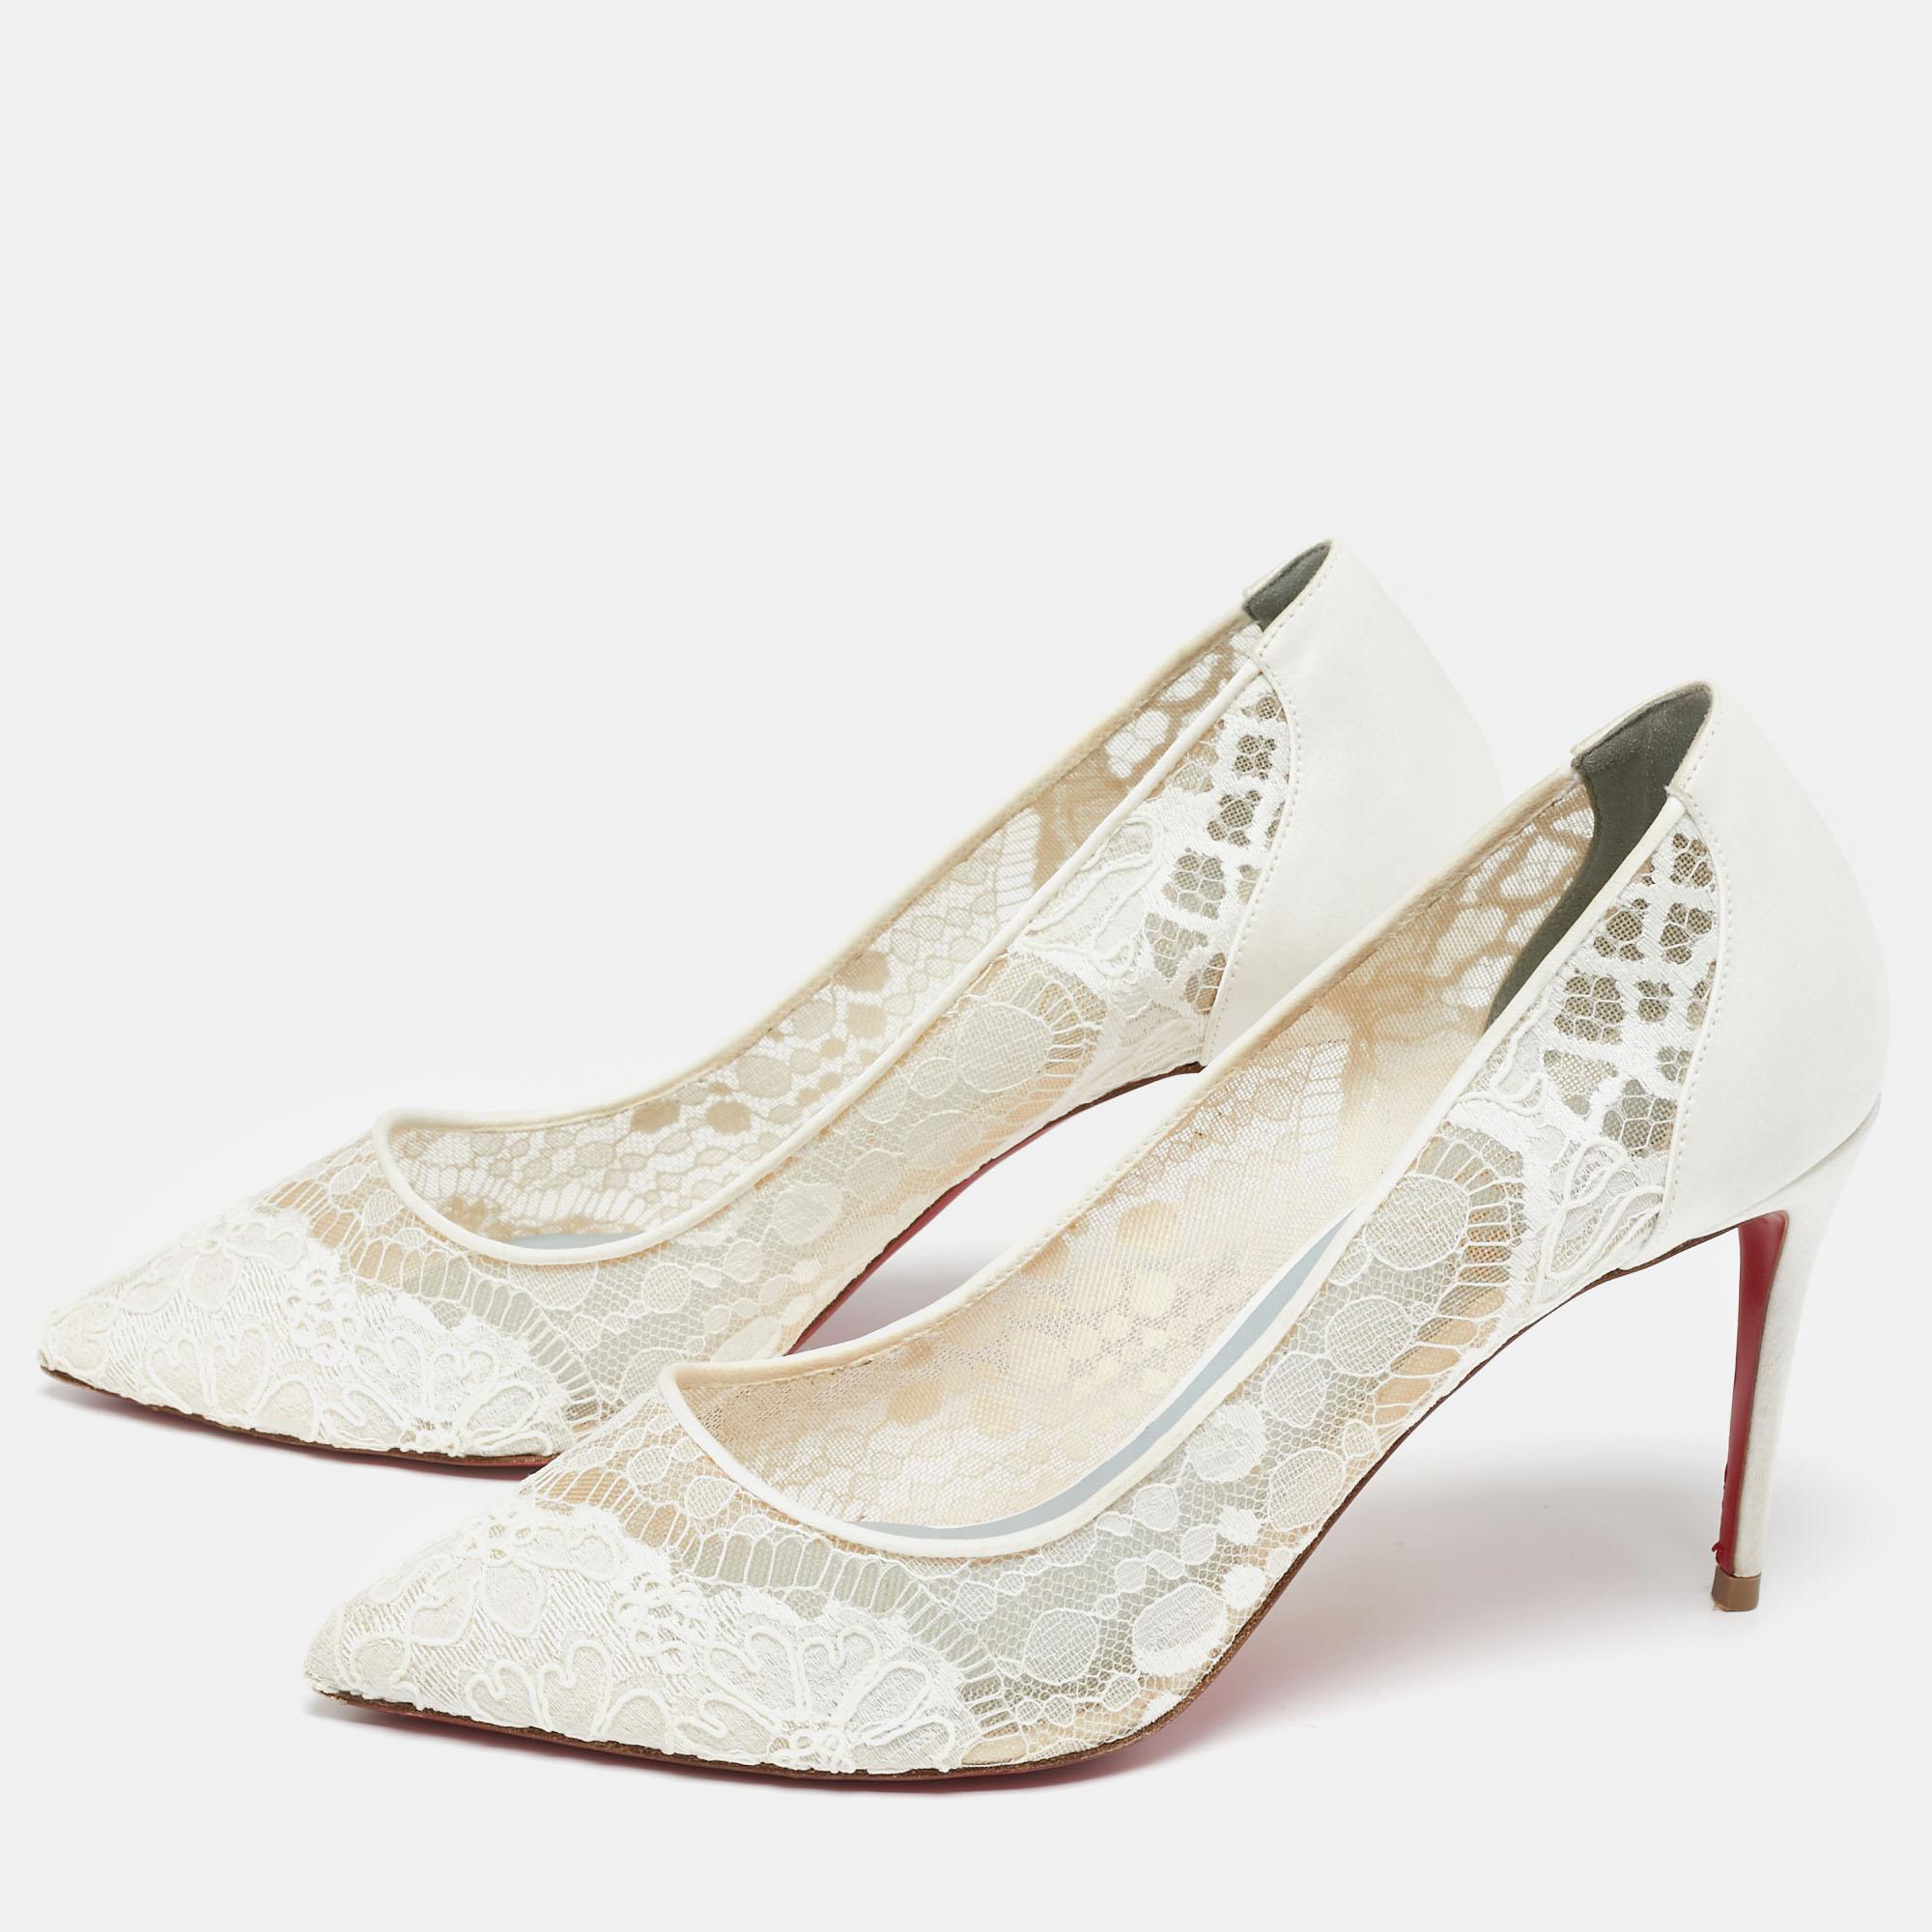 
Dazzle everyone with these pretty Louboutins by owning them today. Crafted from lace and satin, they carry a pointed toe design, sleek silhouette, and a glorious ivory-colored exterior. Completed with slender heels and signature red soles, this